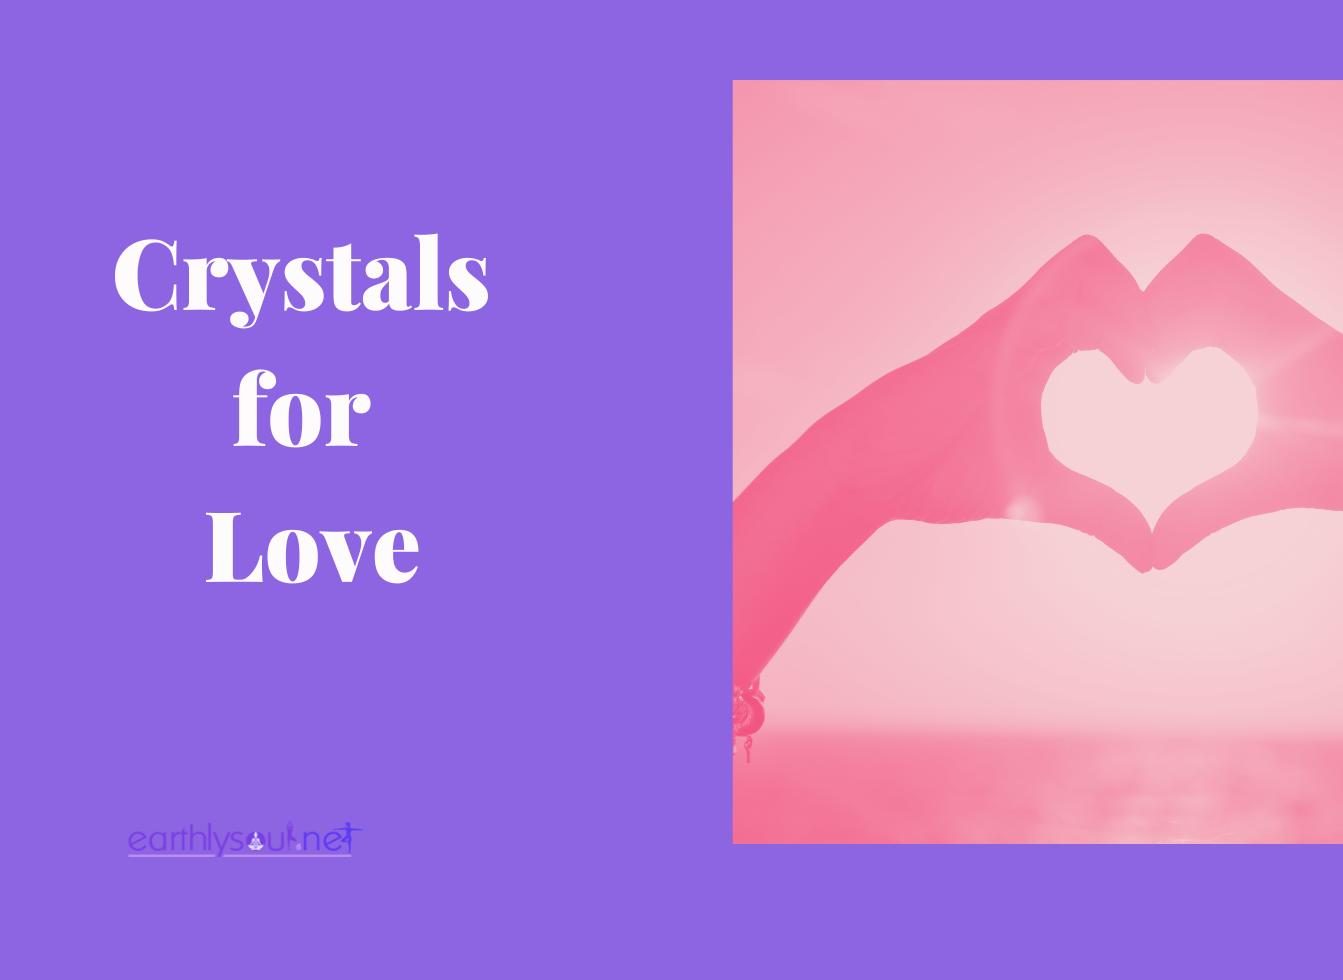 Crystals for love featured image